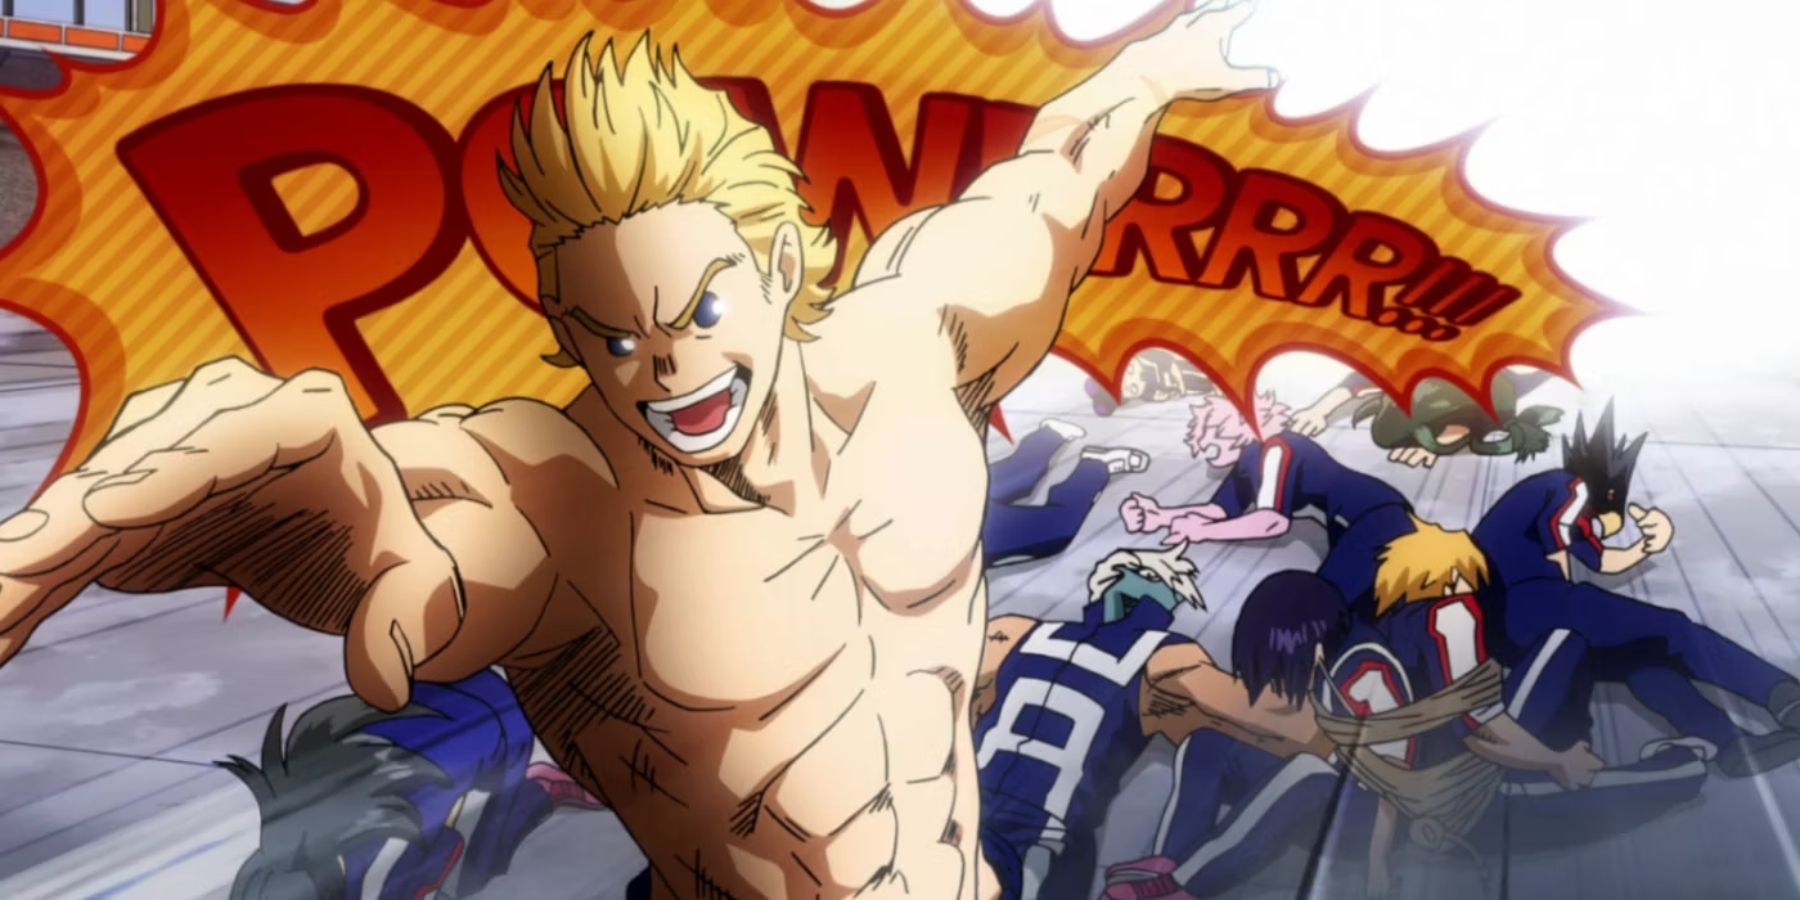 Mirio taking down members of Class 1-A with his Permeation Quirk in My Hero Academia